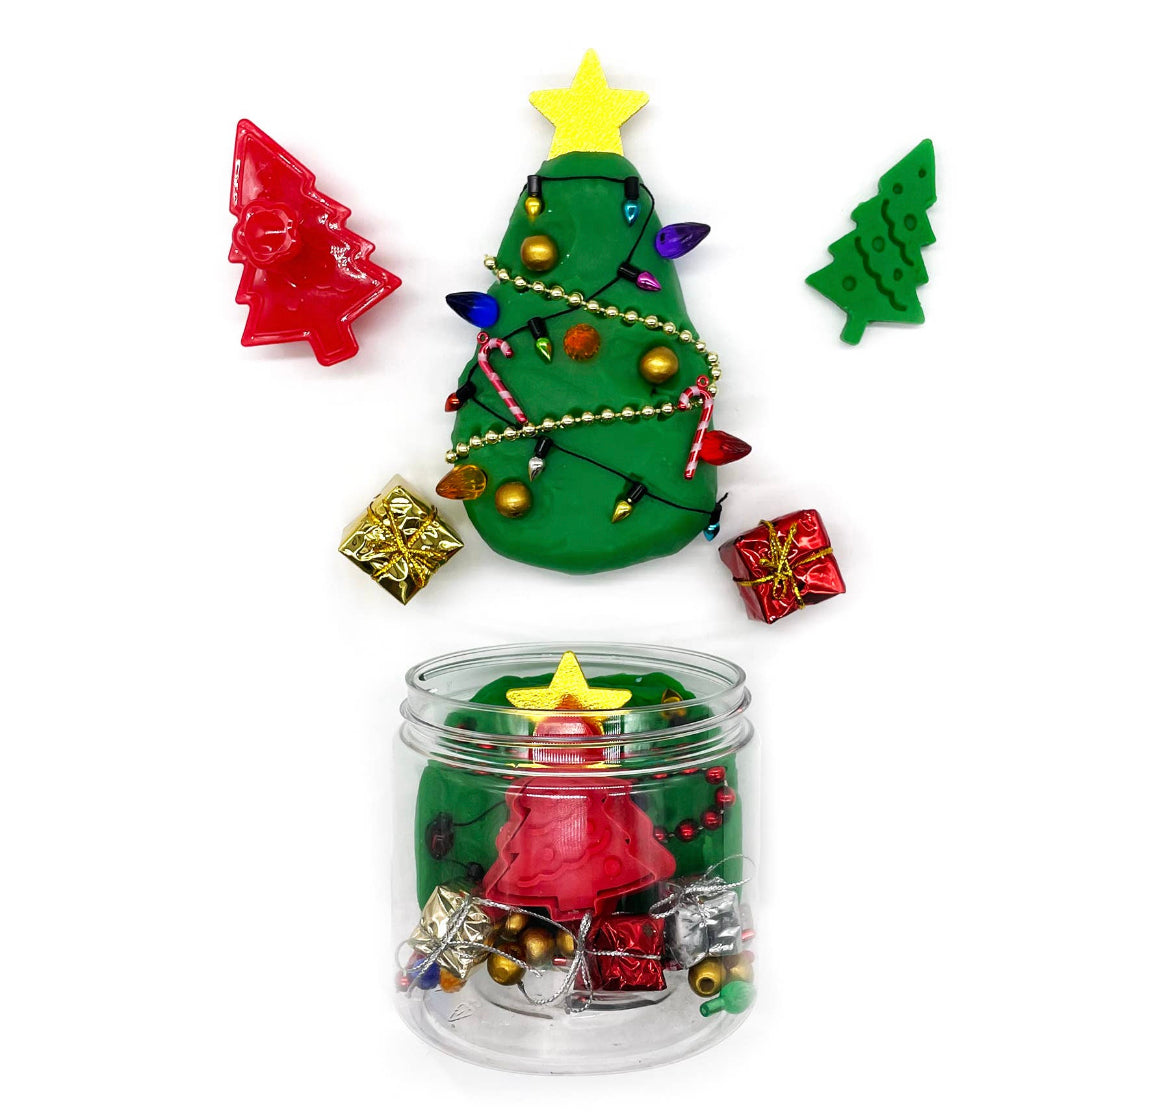 Decorate the Christmas Tree Play Dough-To-Go Kit